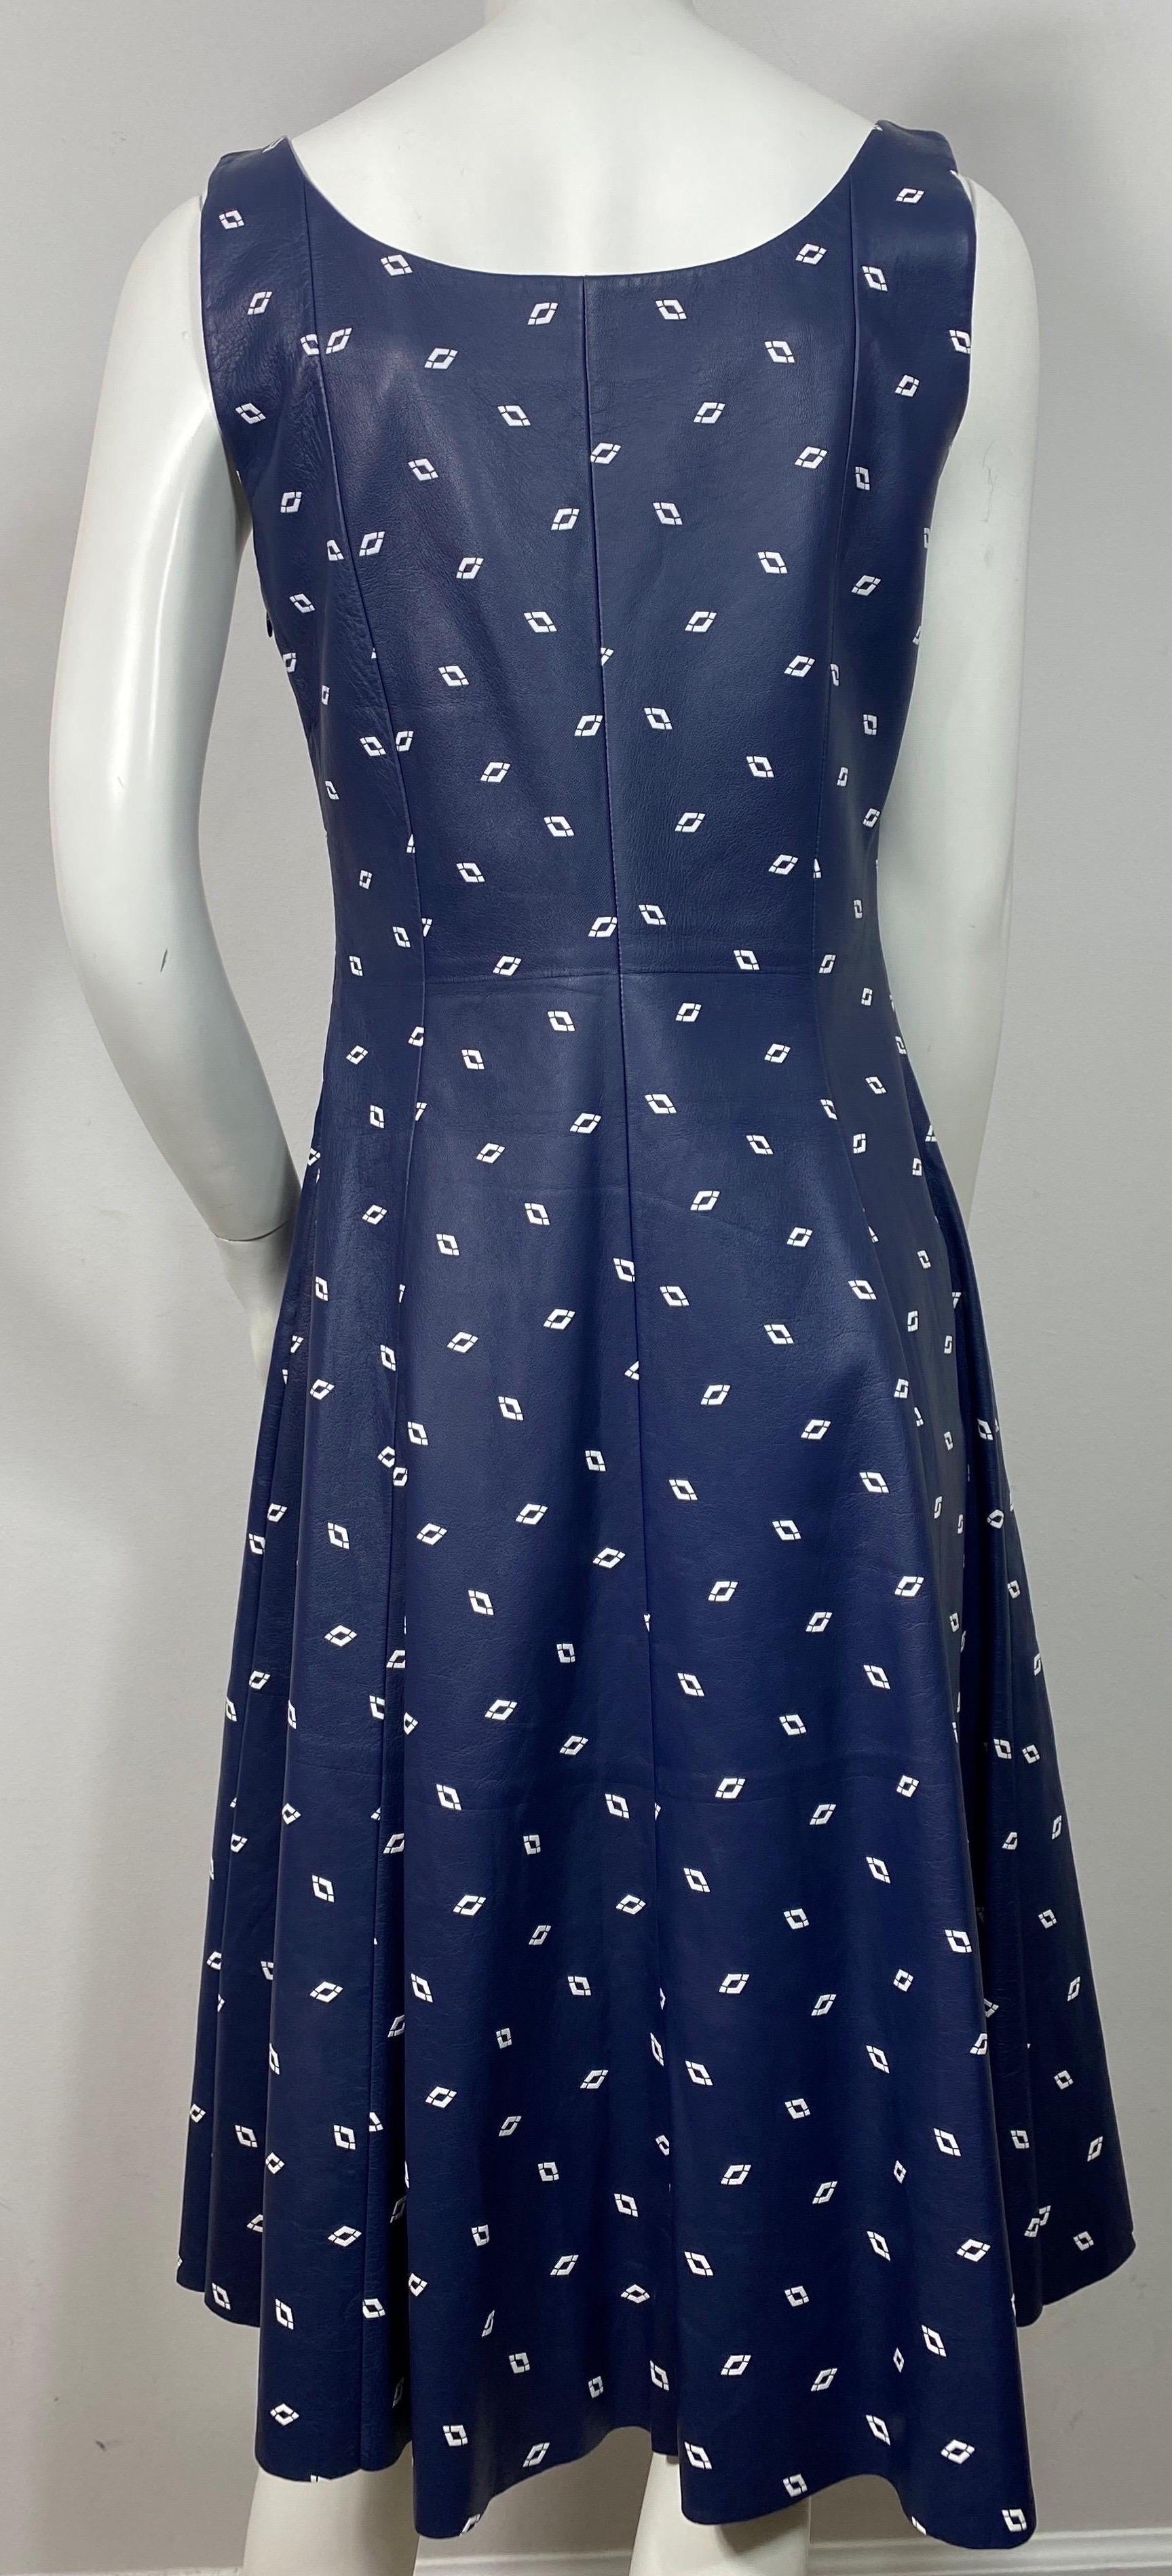 Ralph Lauren Purple Label Navy and White Leather Dress - Size 10 For Sale 5